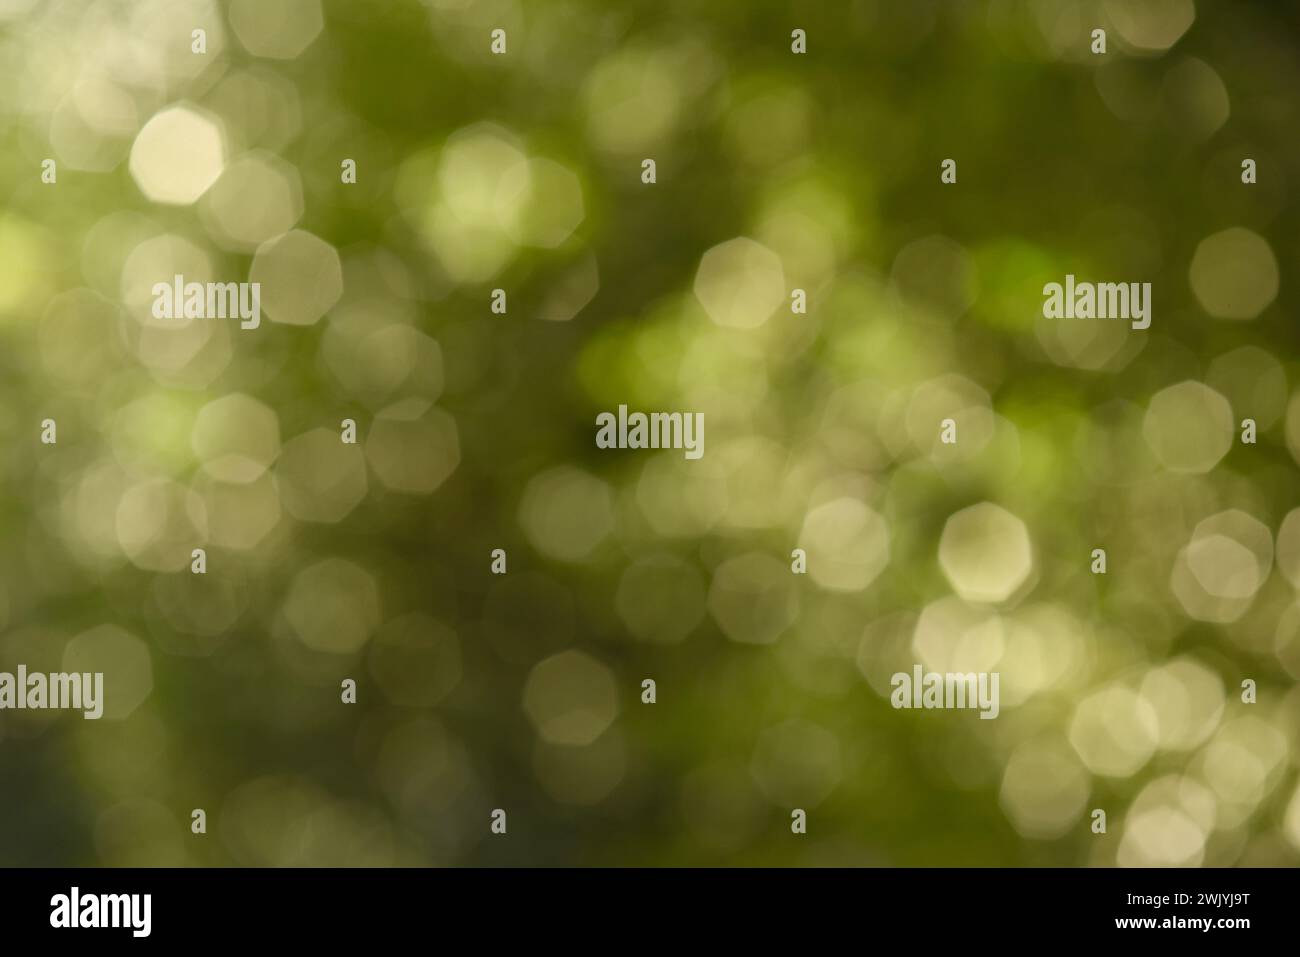 Abstract blurred green nature background with beautiful bokeh. Photographed outdoors using backlighting technique. Element of design. Stock Photo